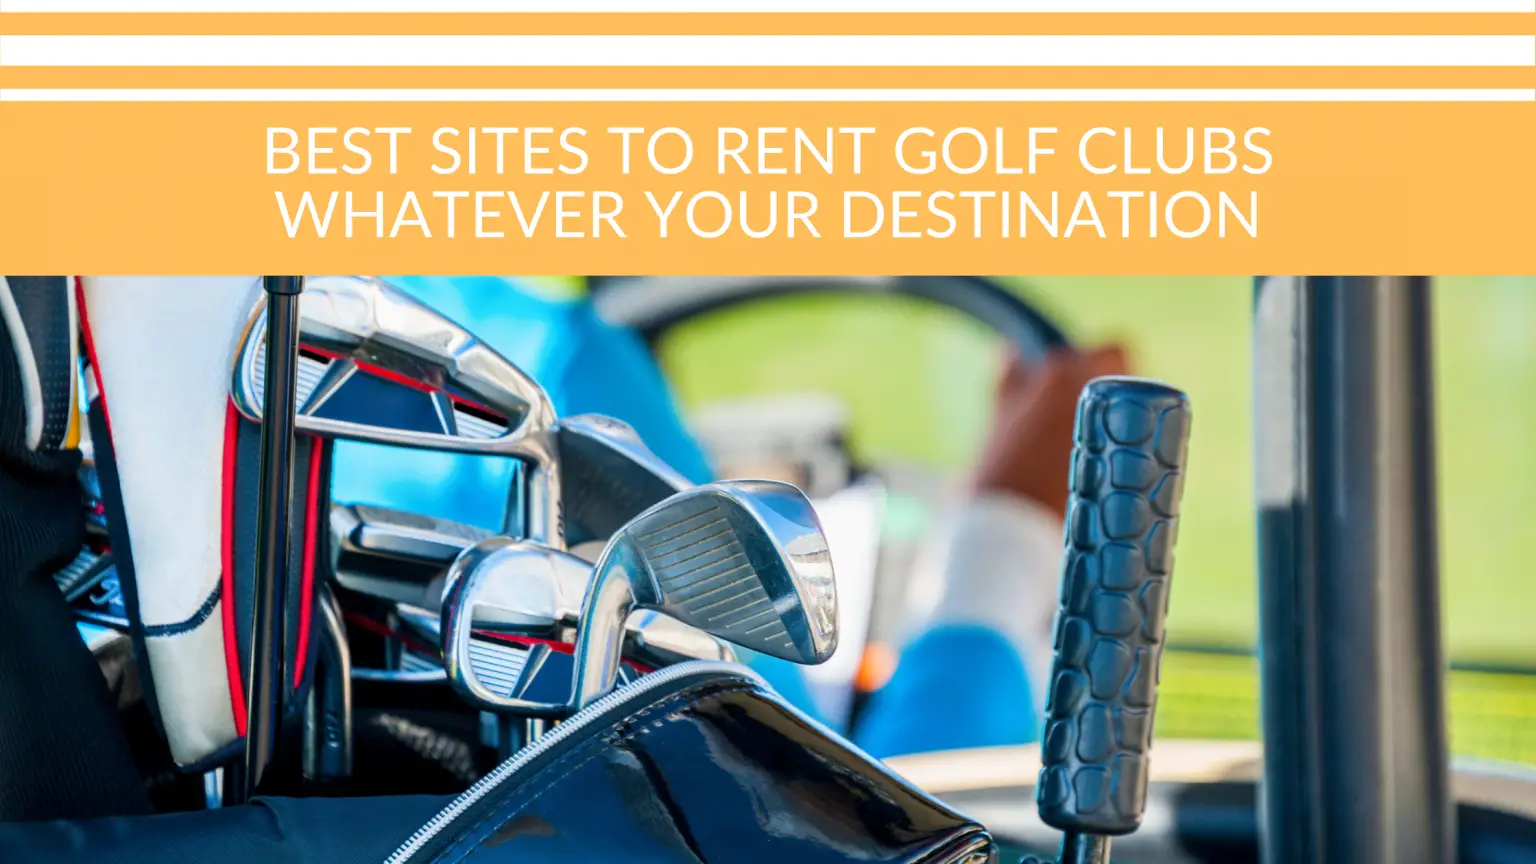 travel with golf clubs or rent